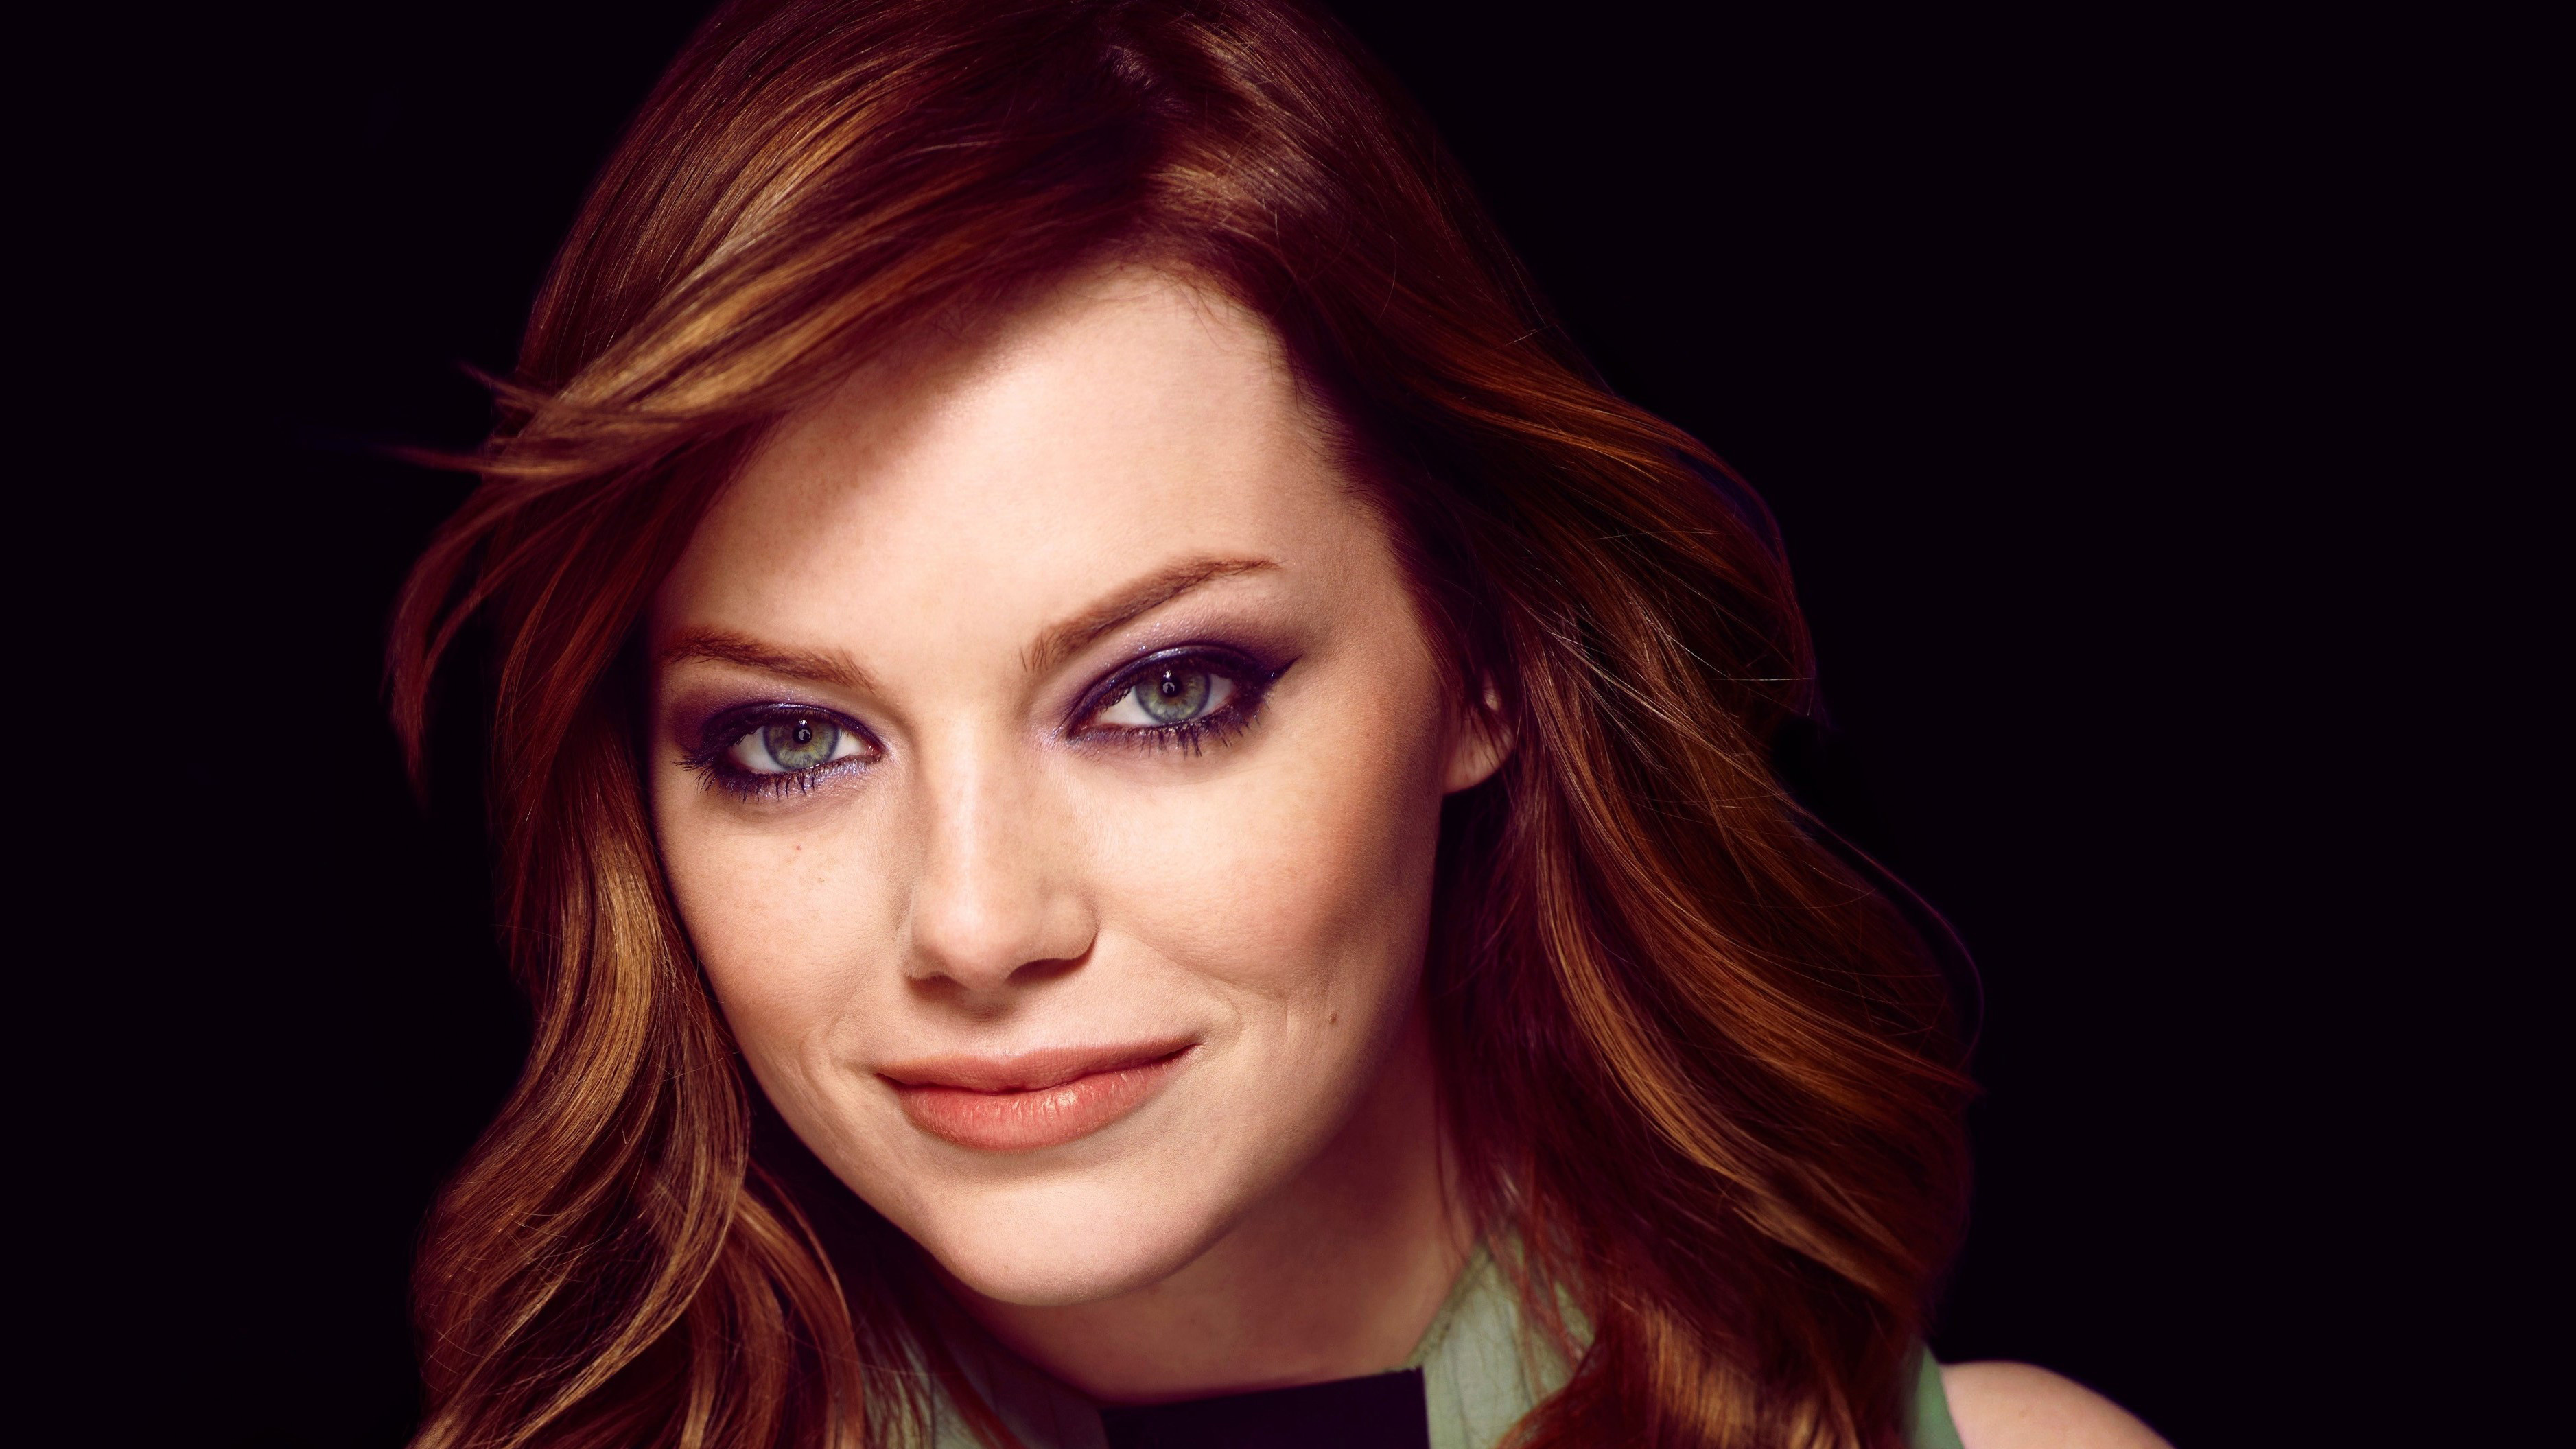 Emma Stone movies, 4K wallpapers, Celebrities' beauty, High-quality pictures, 3760x2120 HD Desktop